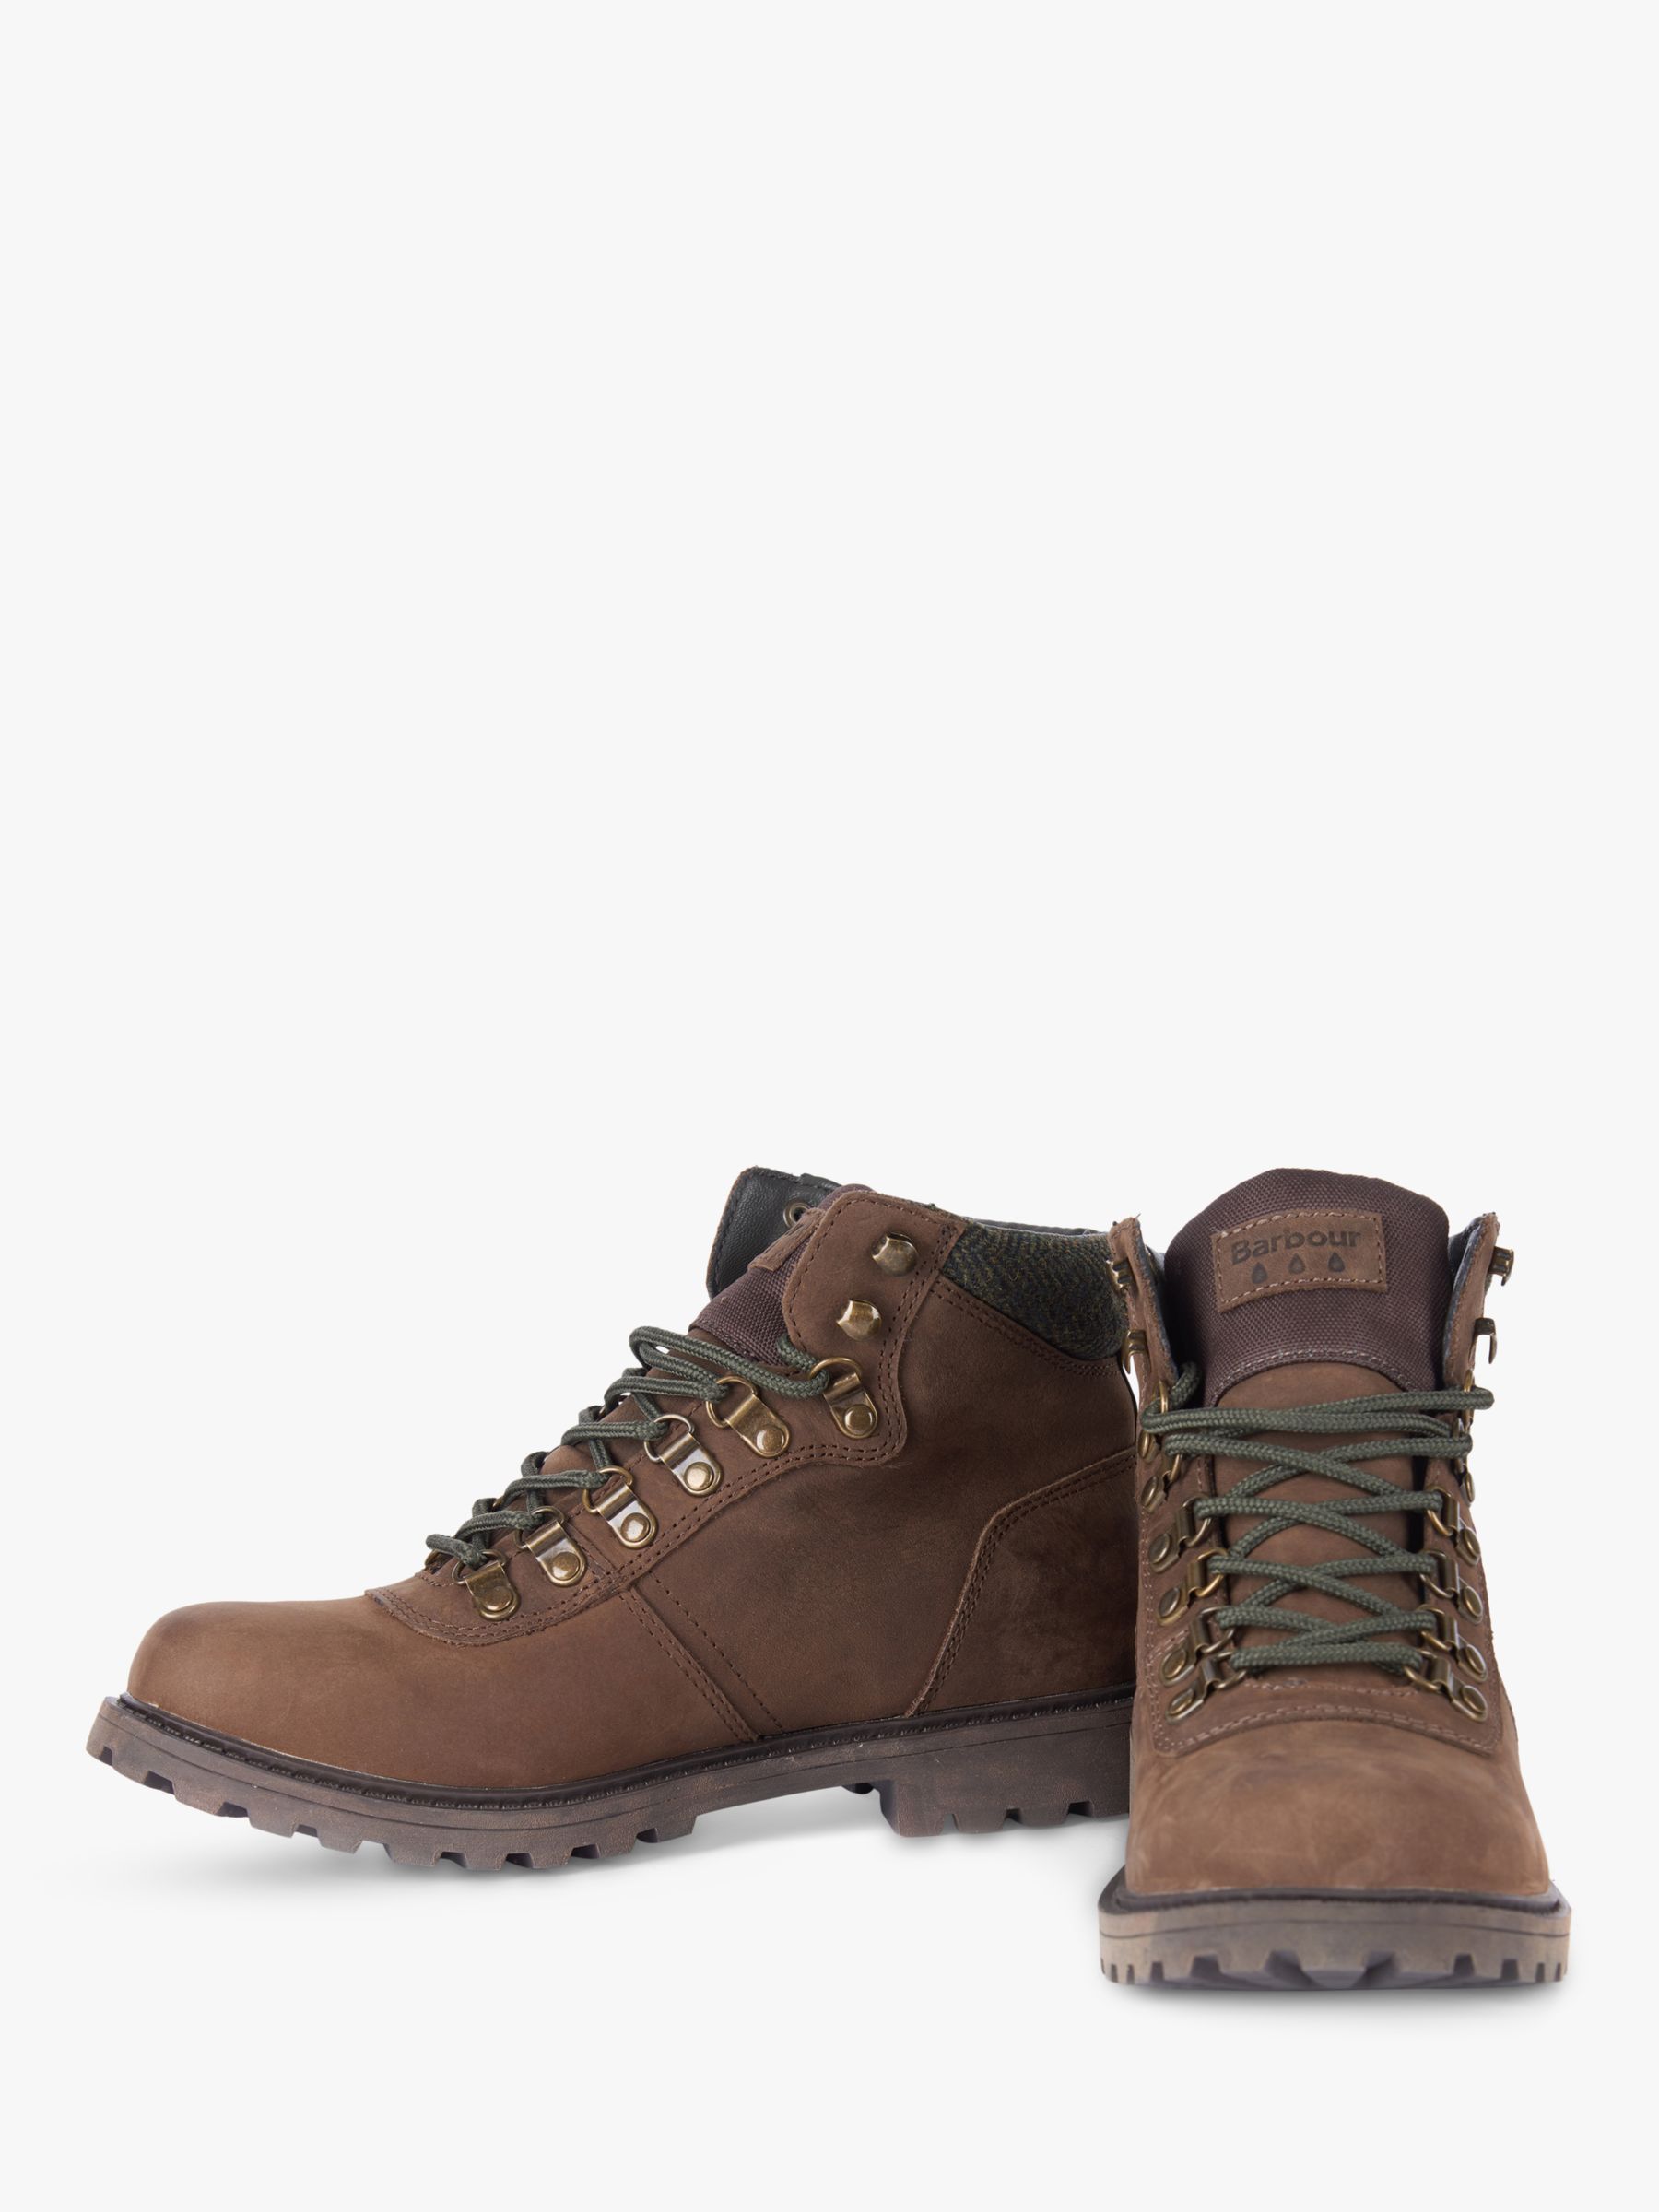 barbour walking boots